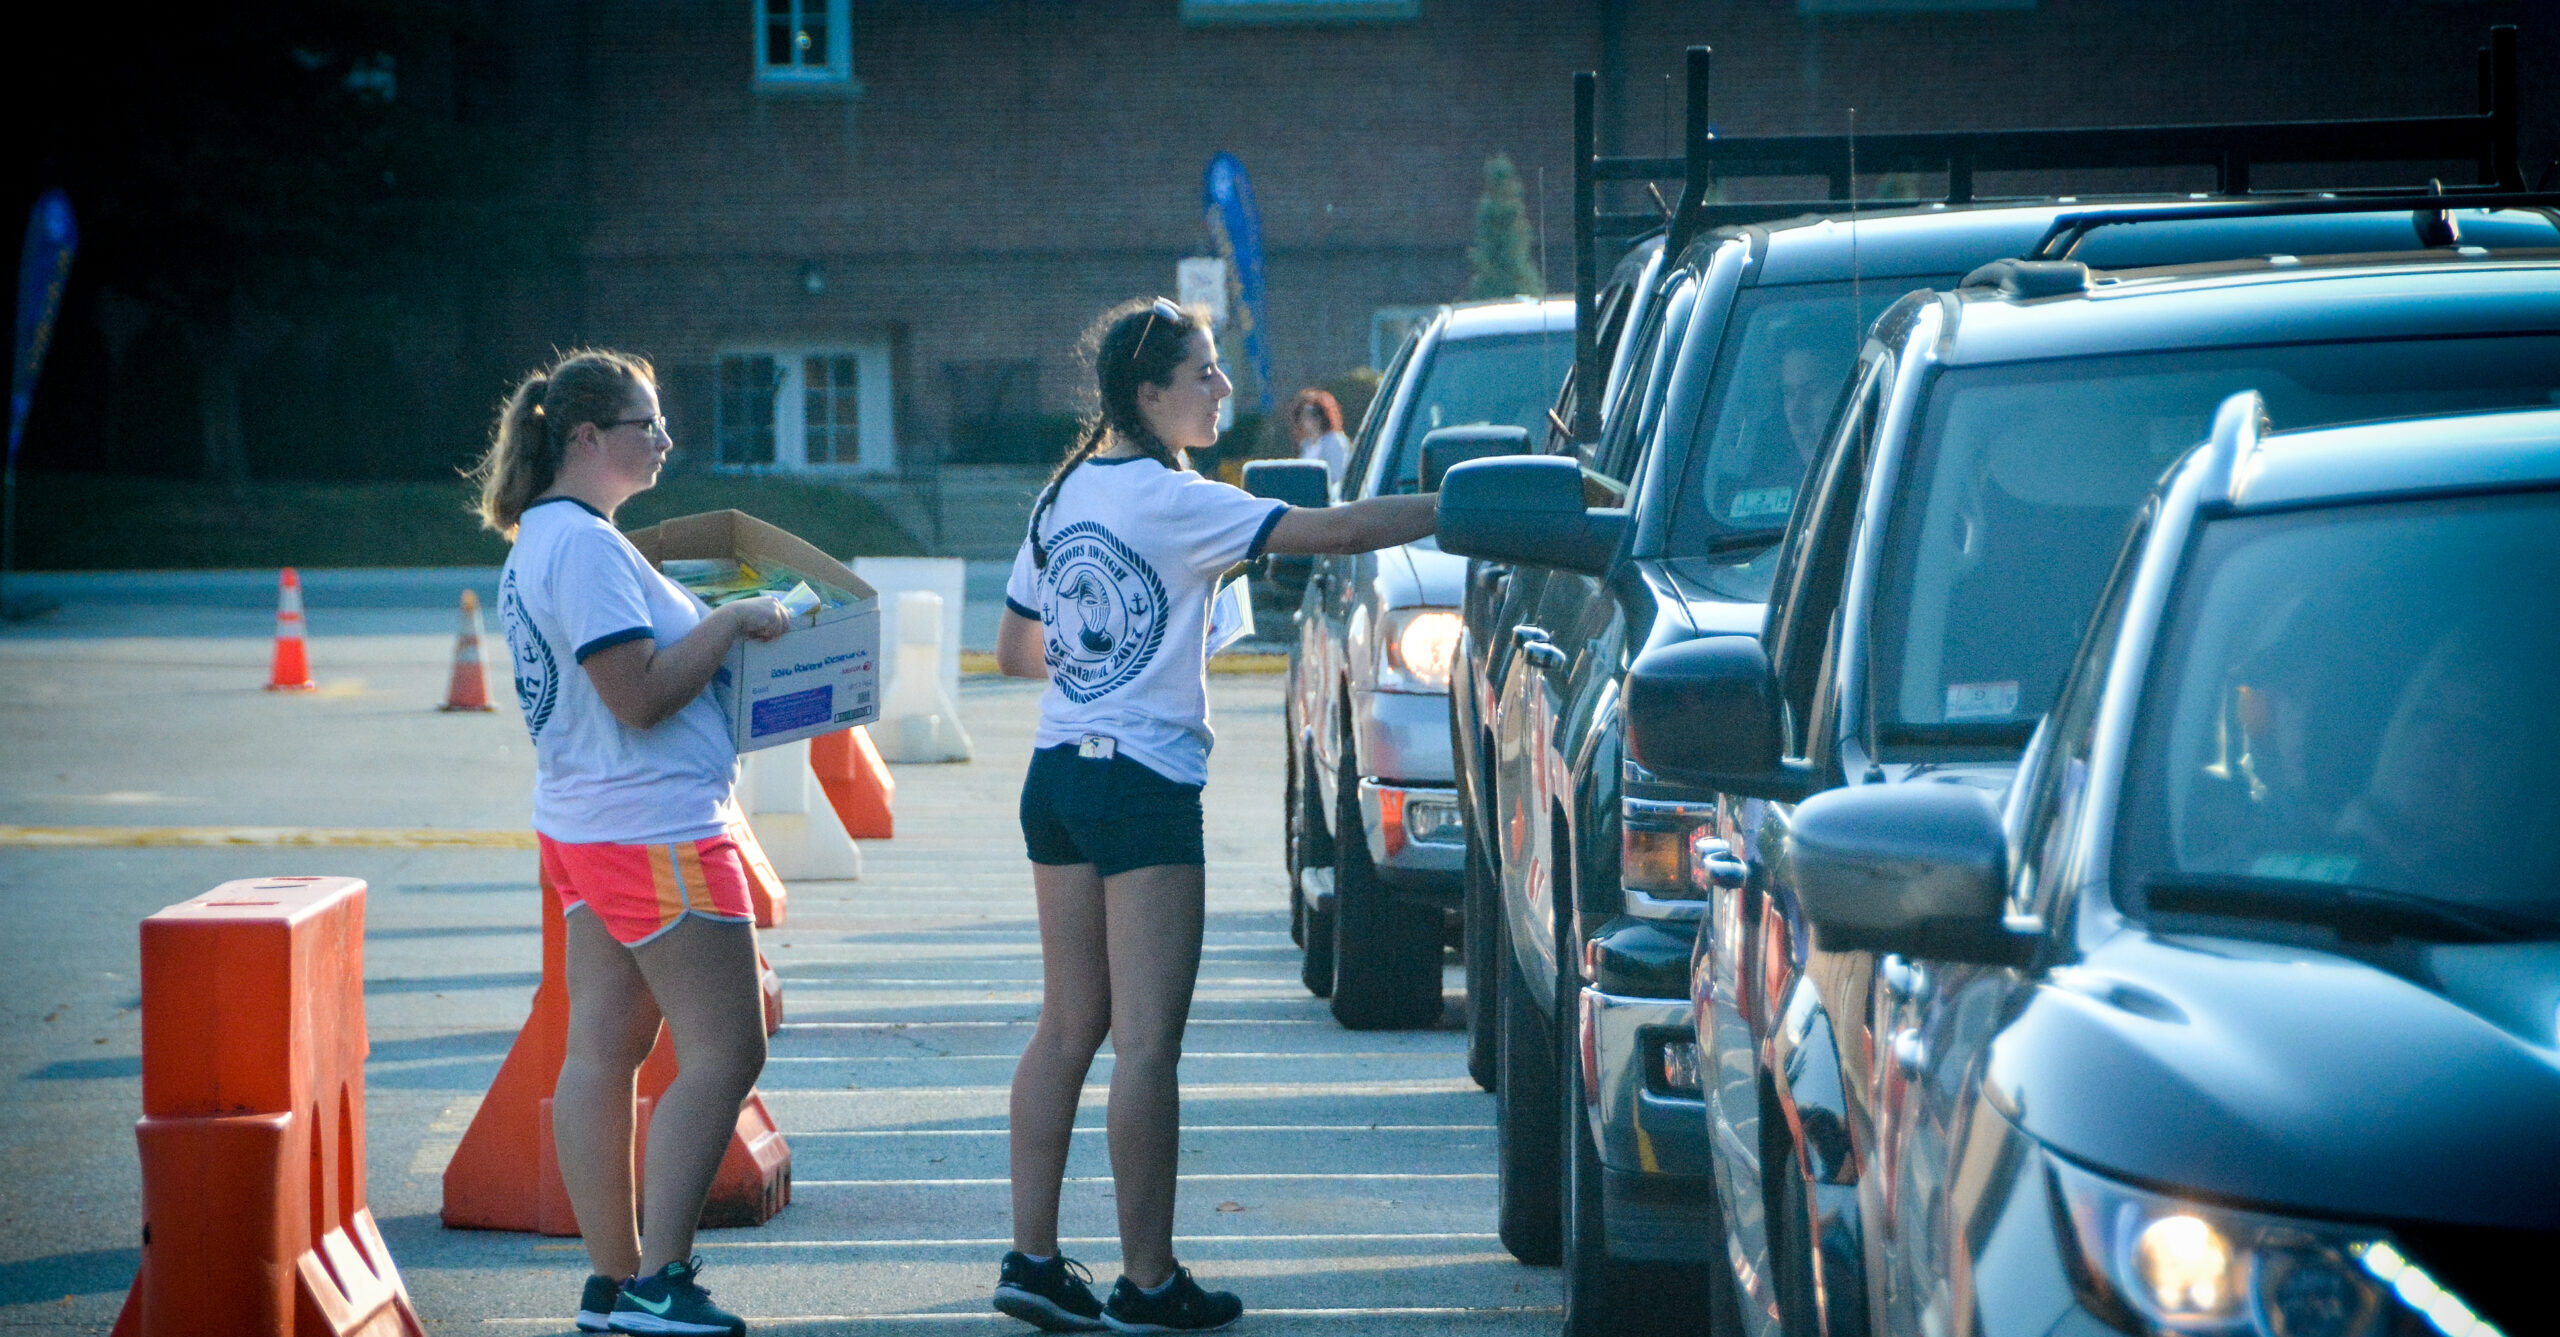 Two Worcester state students handing out information on Move-in day